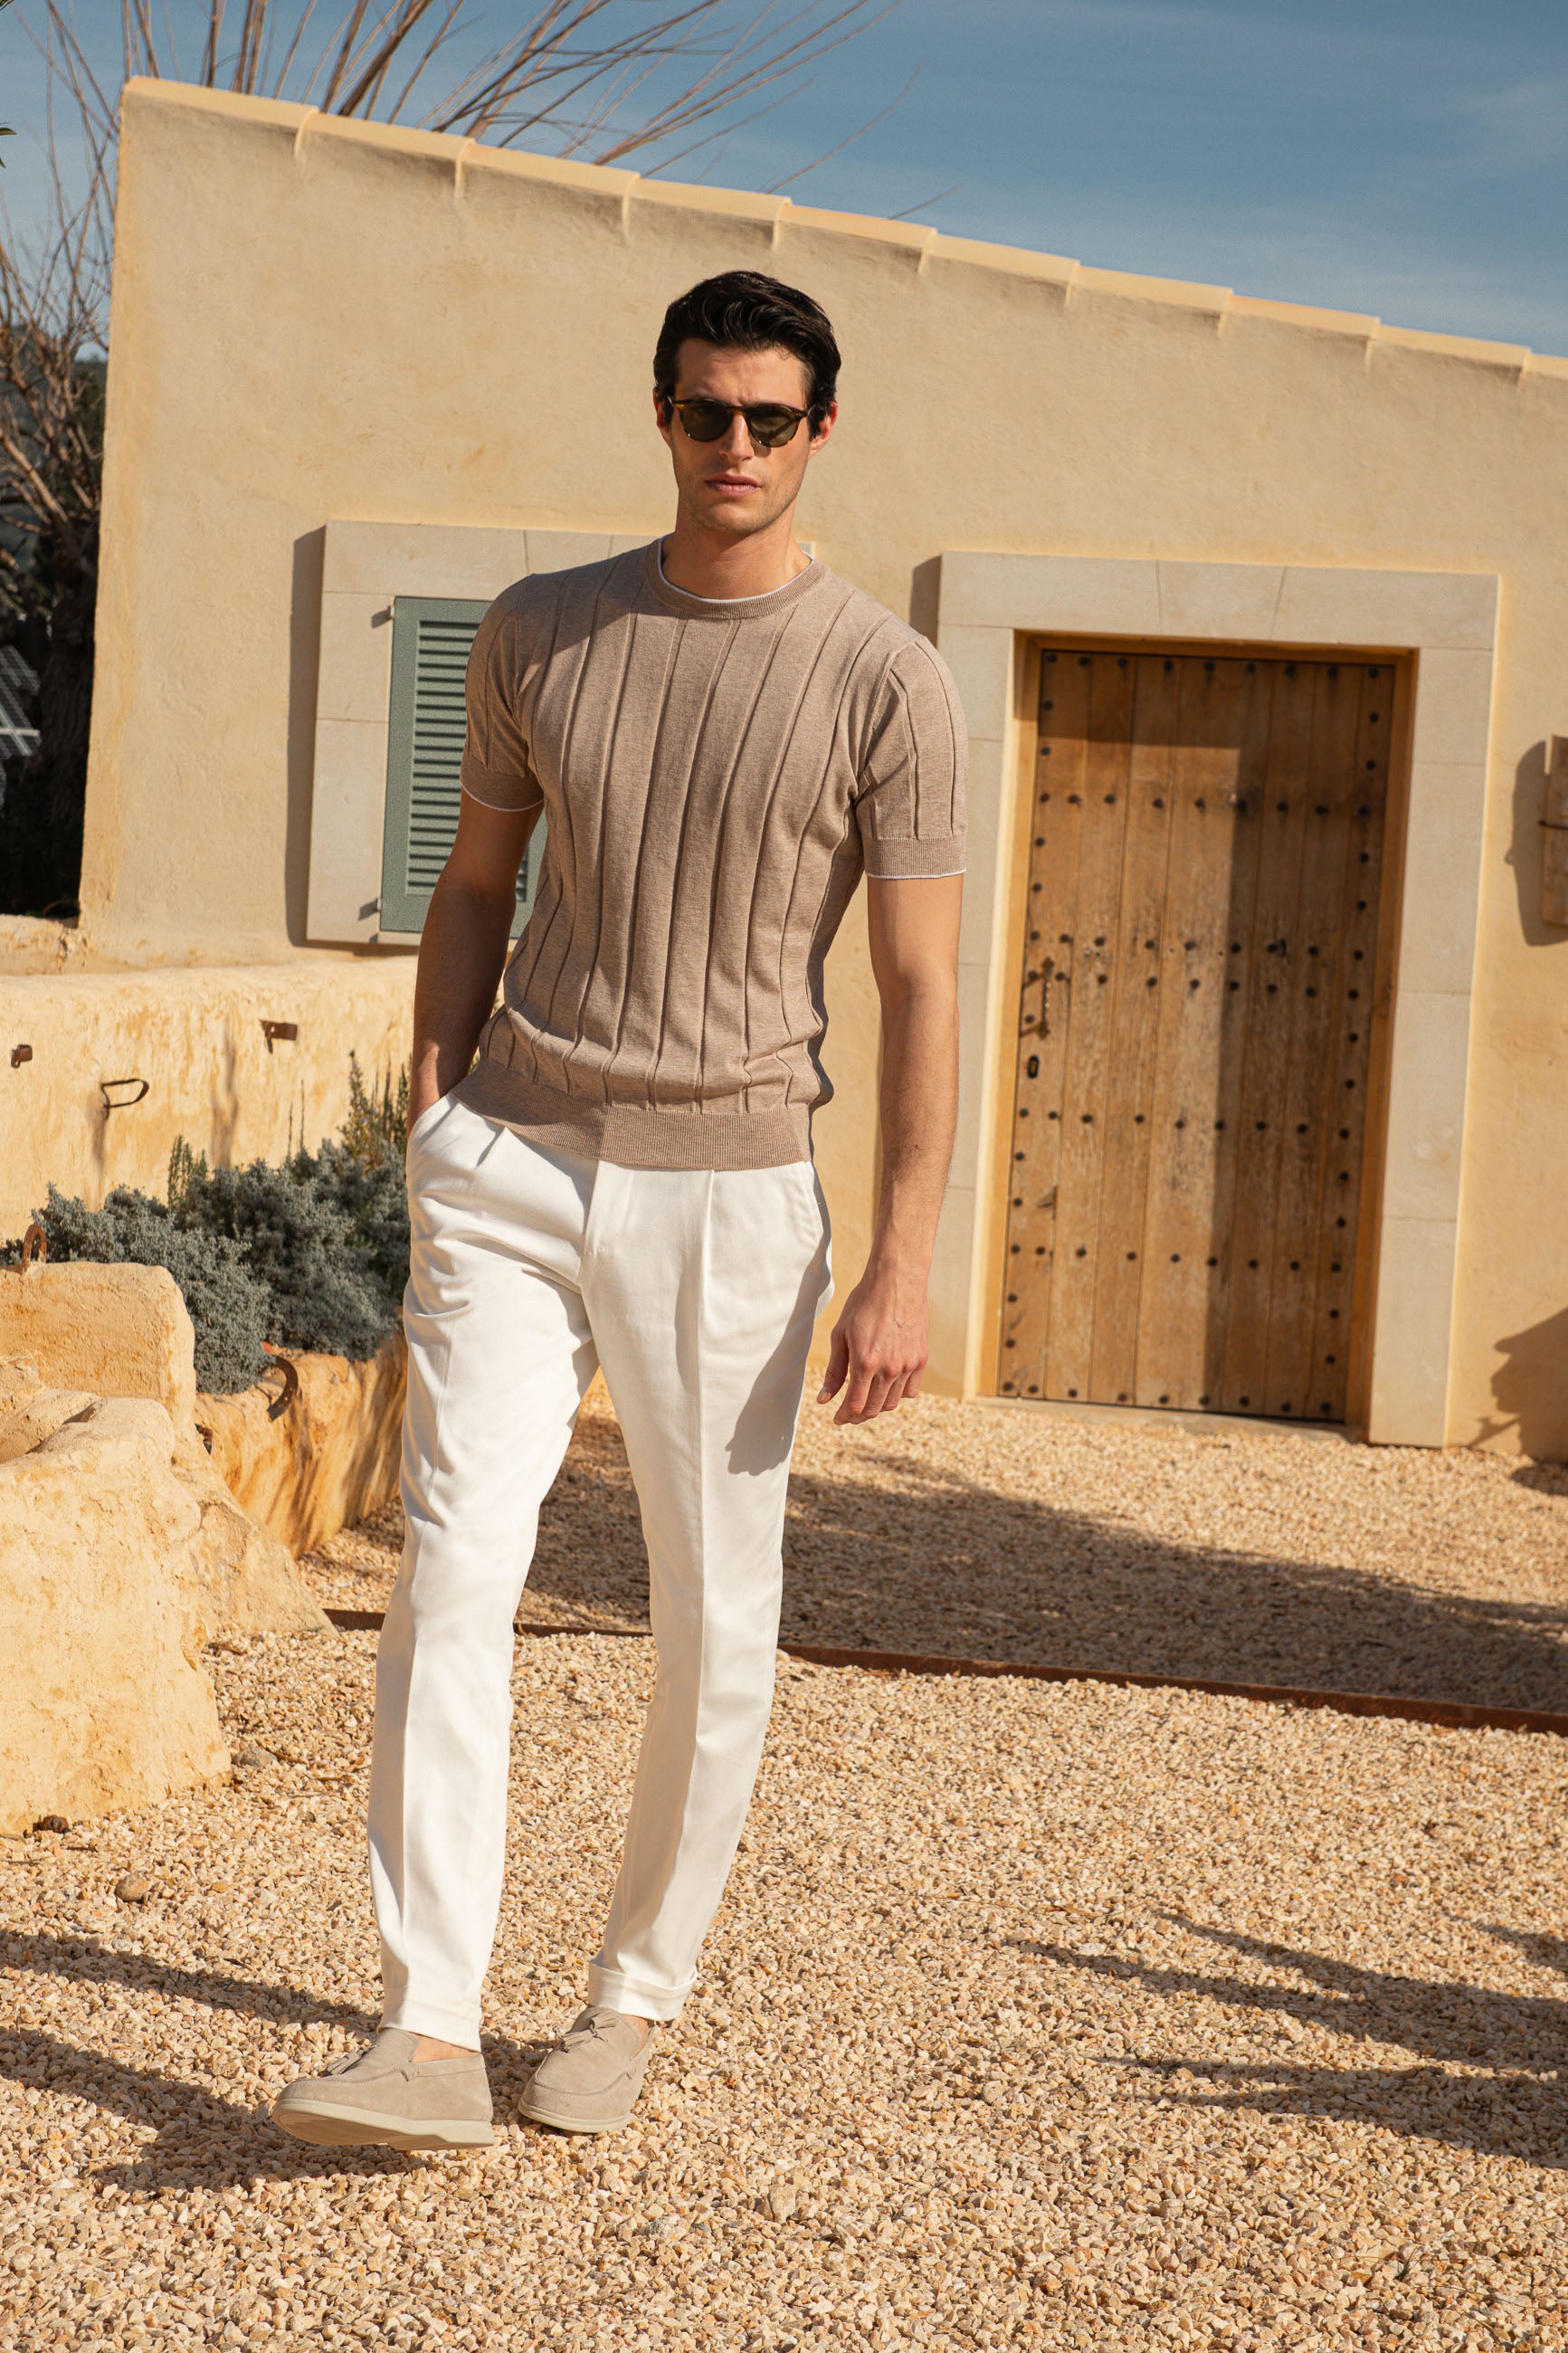 Taupe   Ribbed t-shirt, Knit  t-shirt, Taupe , cotton knitted t-shirt, cotton ribbed Taupe -shirt, Taupe  ribbed t-shirt, Maglietta Taupe a coste, Maglietta a maglia, Taupe , Maglietta a maglia in cotone, Camicia Taupe  a coste in cotone, Maglietta Taupe a coste, T-shirt Taupe côtelé, t-shirt en tricot, Taupe , t-shirt en coton tricoté, t-shirt Taupe côtelé, t-shirt Taupe côtelé, 